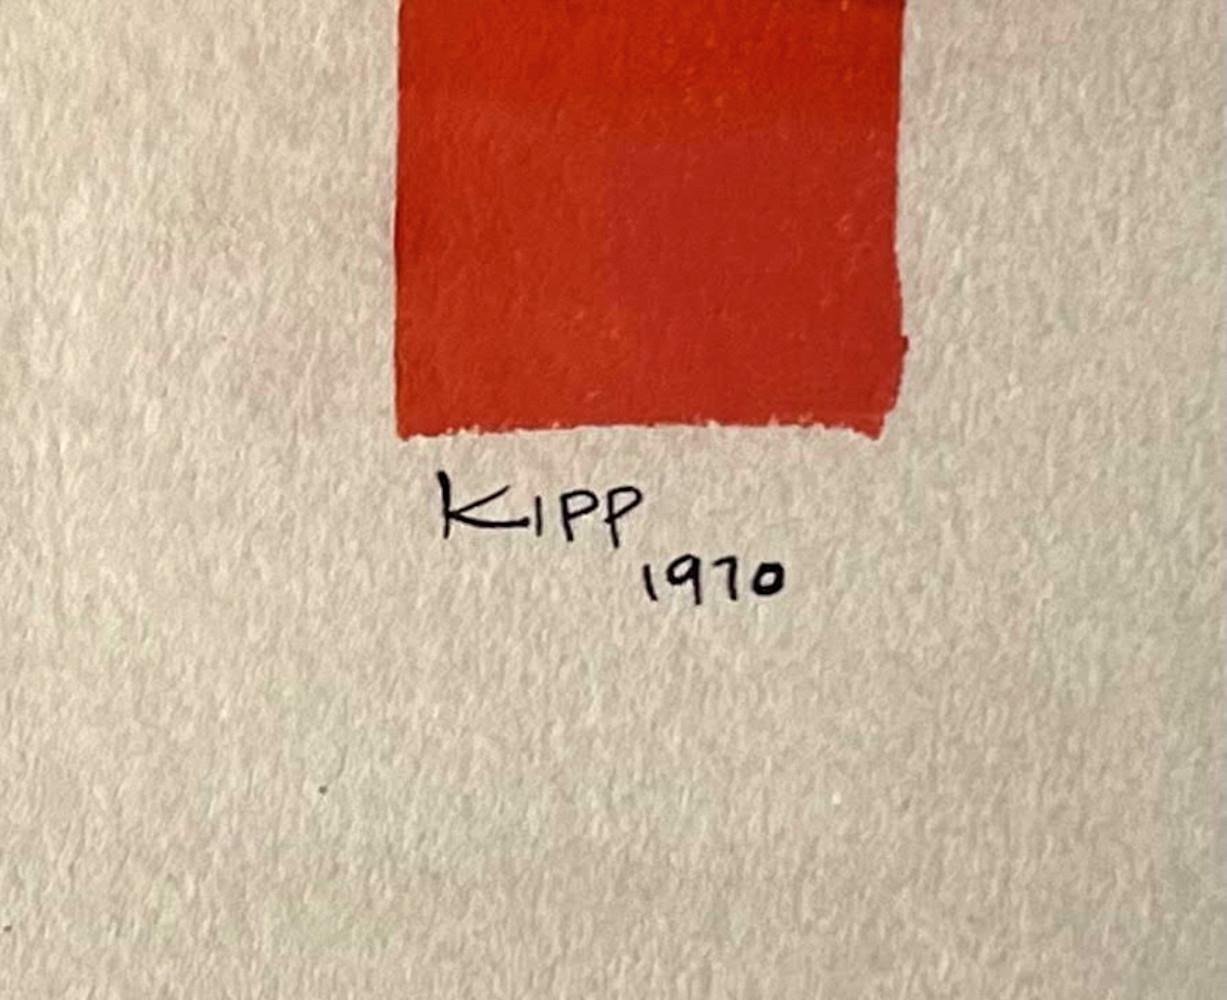 Unique painting on paper done with paint roller by Minimalist pioneer Lyman Kipp - Art by Lyman Kipp 